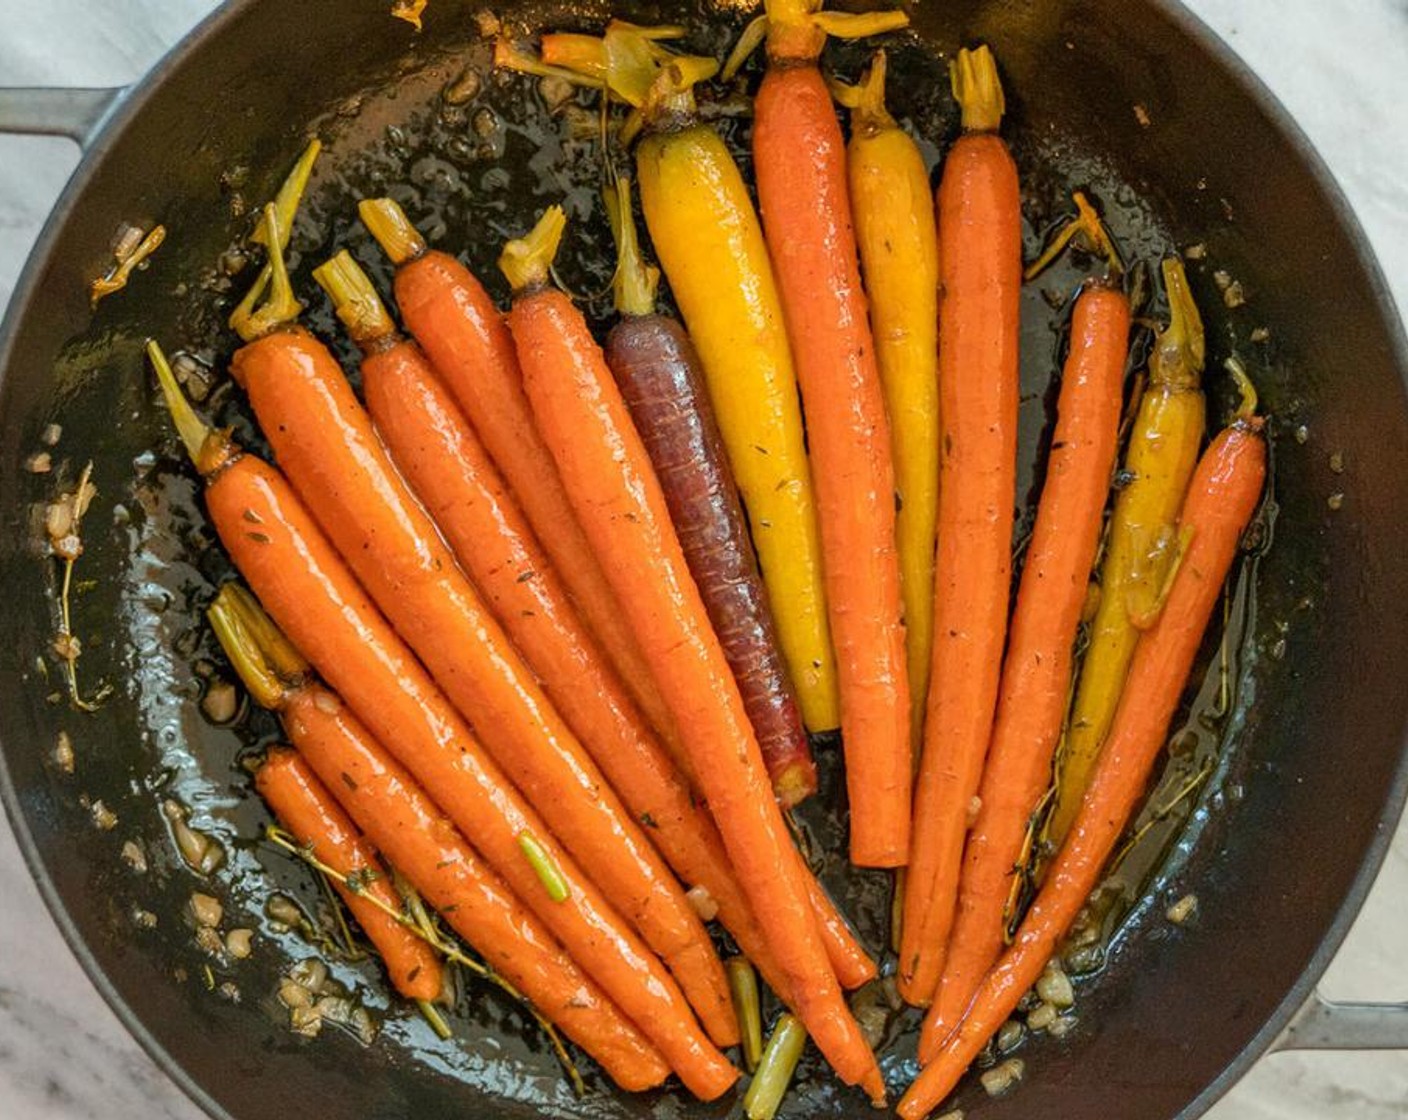 step 4 Sprinkle with Sea Salt (1 pinch) and Ground Black Pepper (1 pinch), if using. Jiggle the pan around to get the carrots coated. Add a splash of water if necessary if the liquid is drying up too quick.